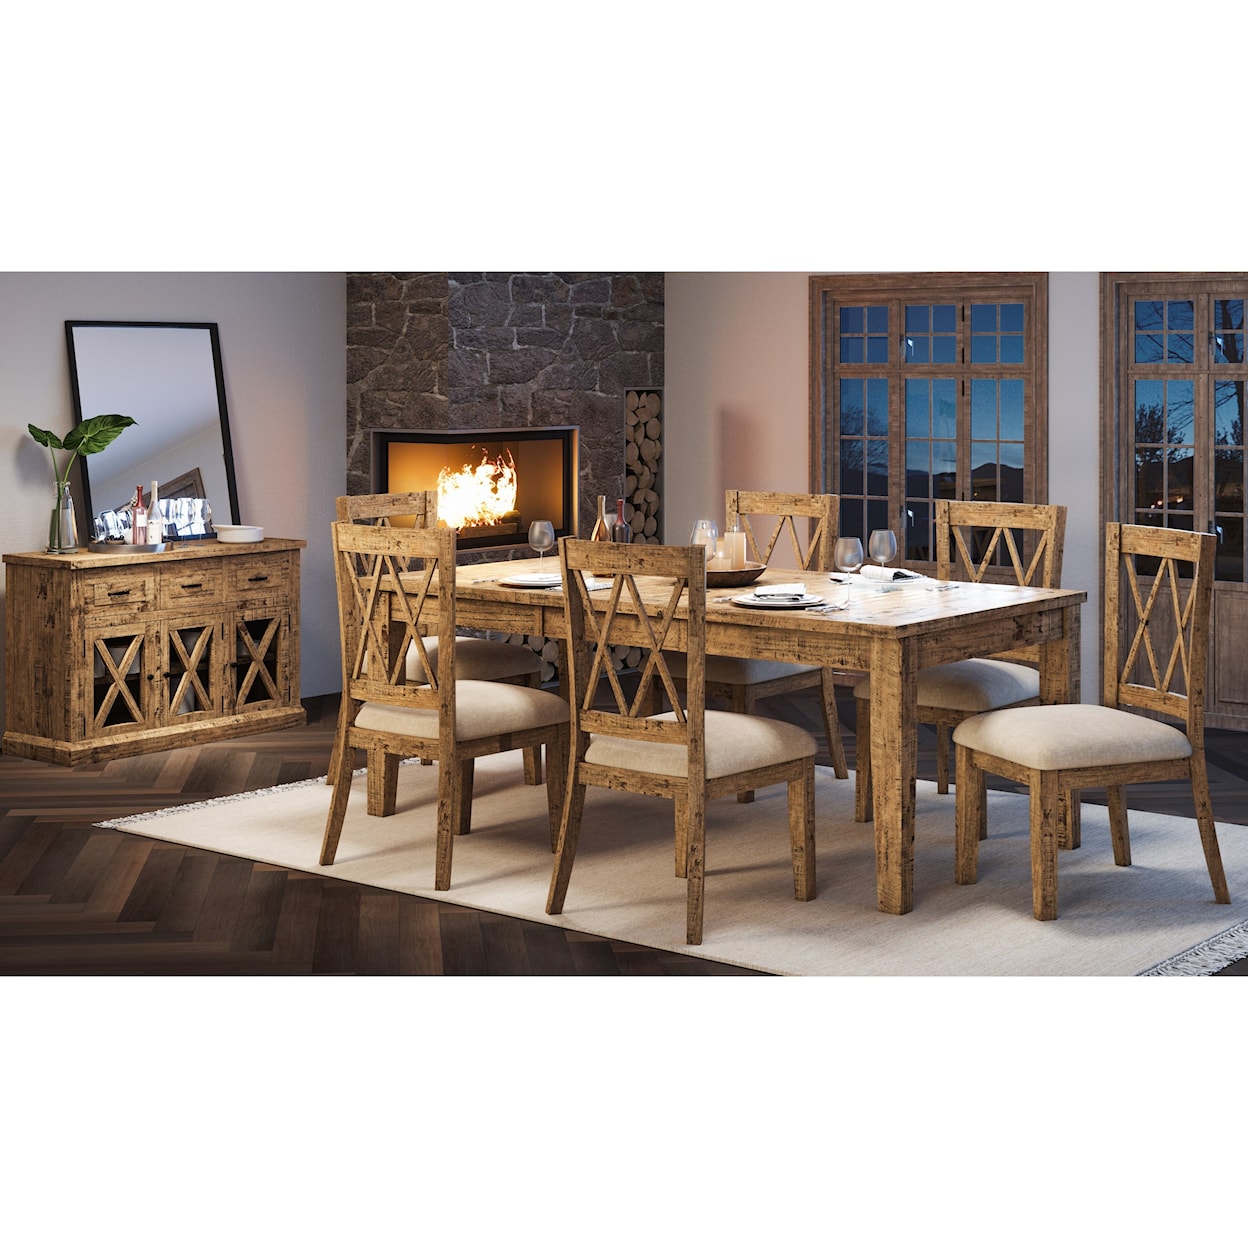 Jofran Telluride 7-Piece Table and Chair Set